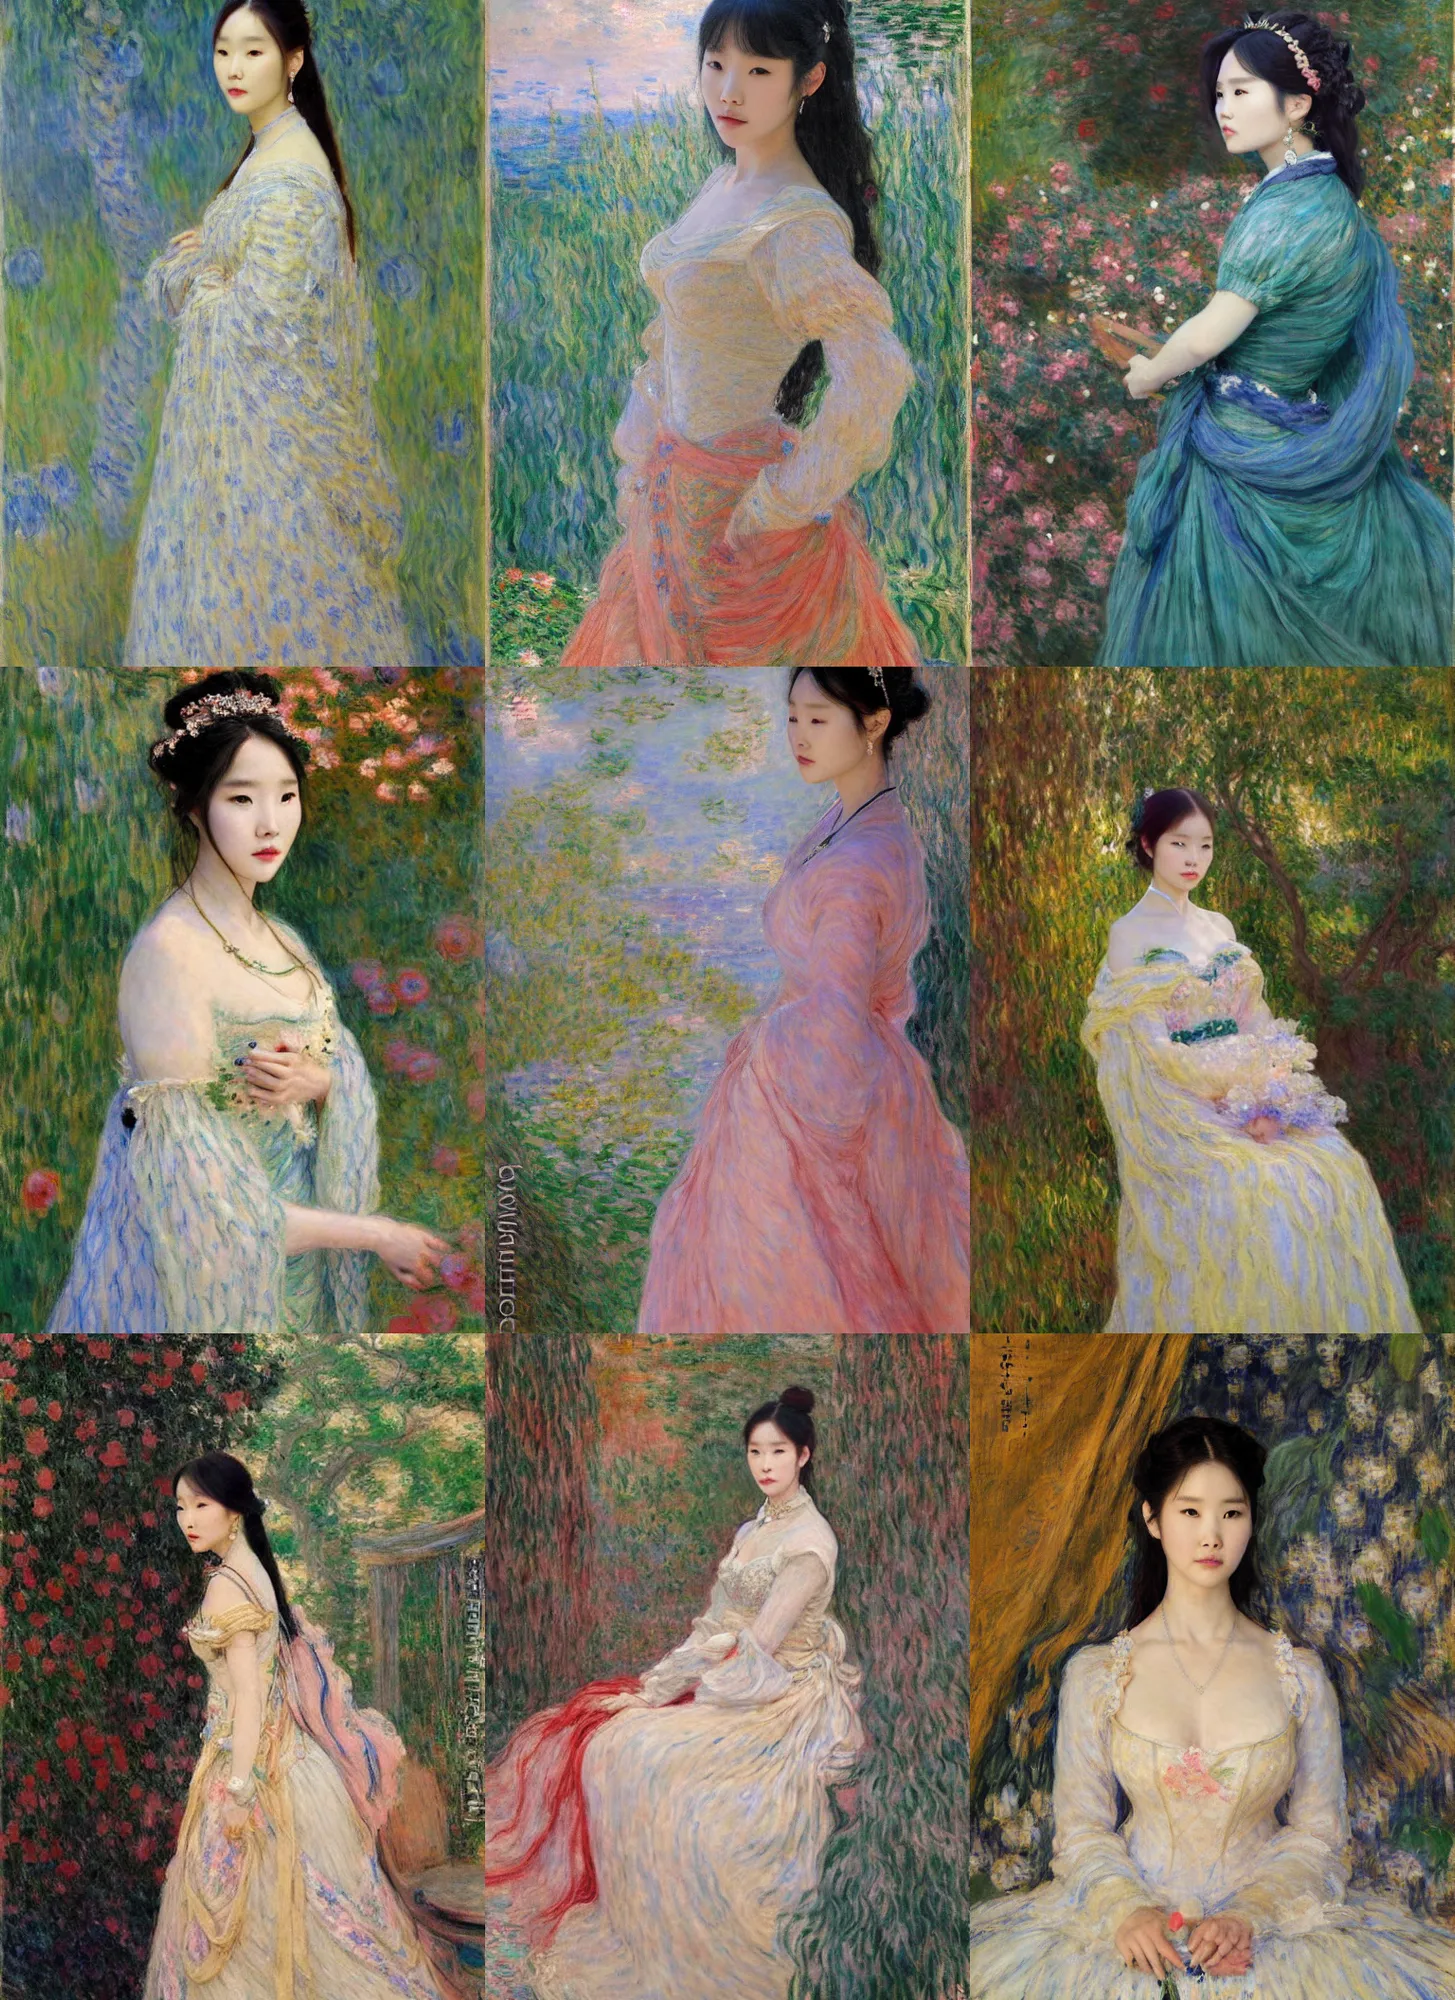 Prompt: lee ji - eun as an alluring luxurious princess by donato giancola and claude monet, rule of thirds, seductive look, beautiful, refined, masterpiece